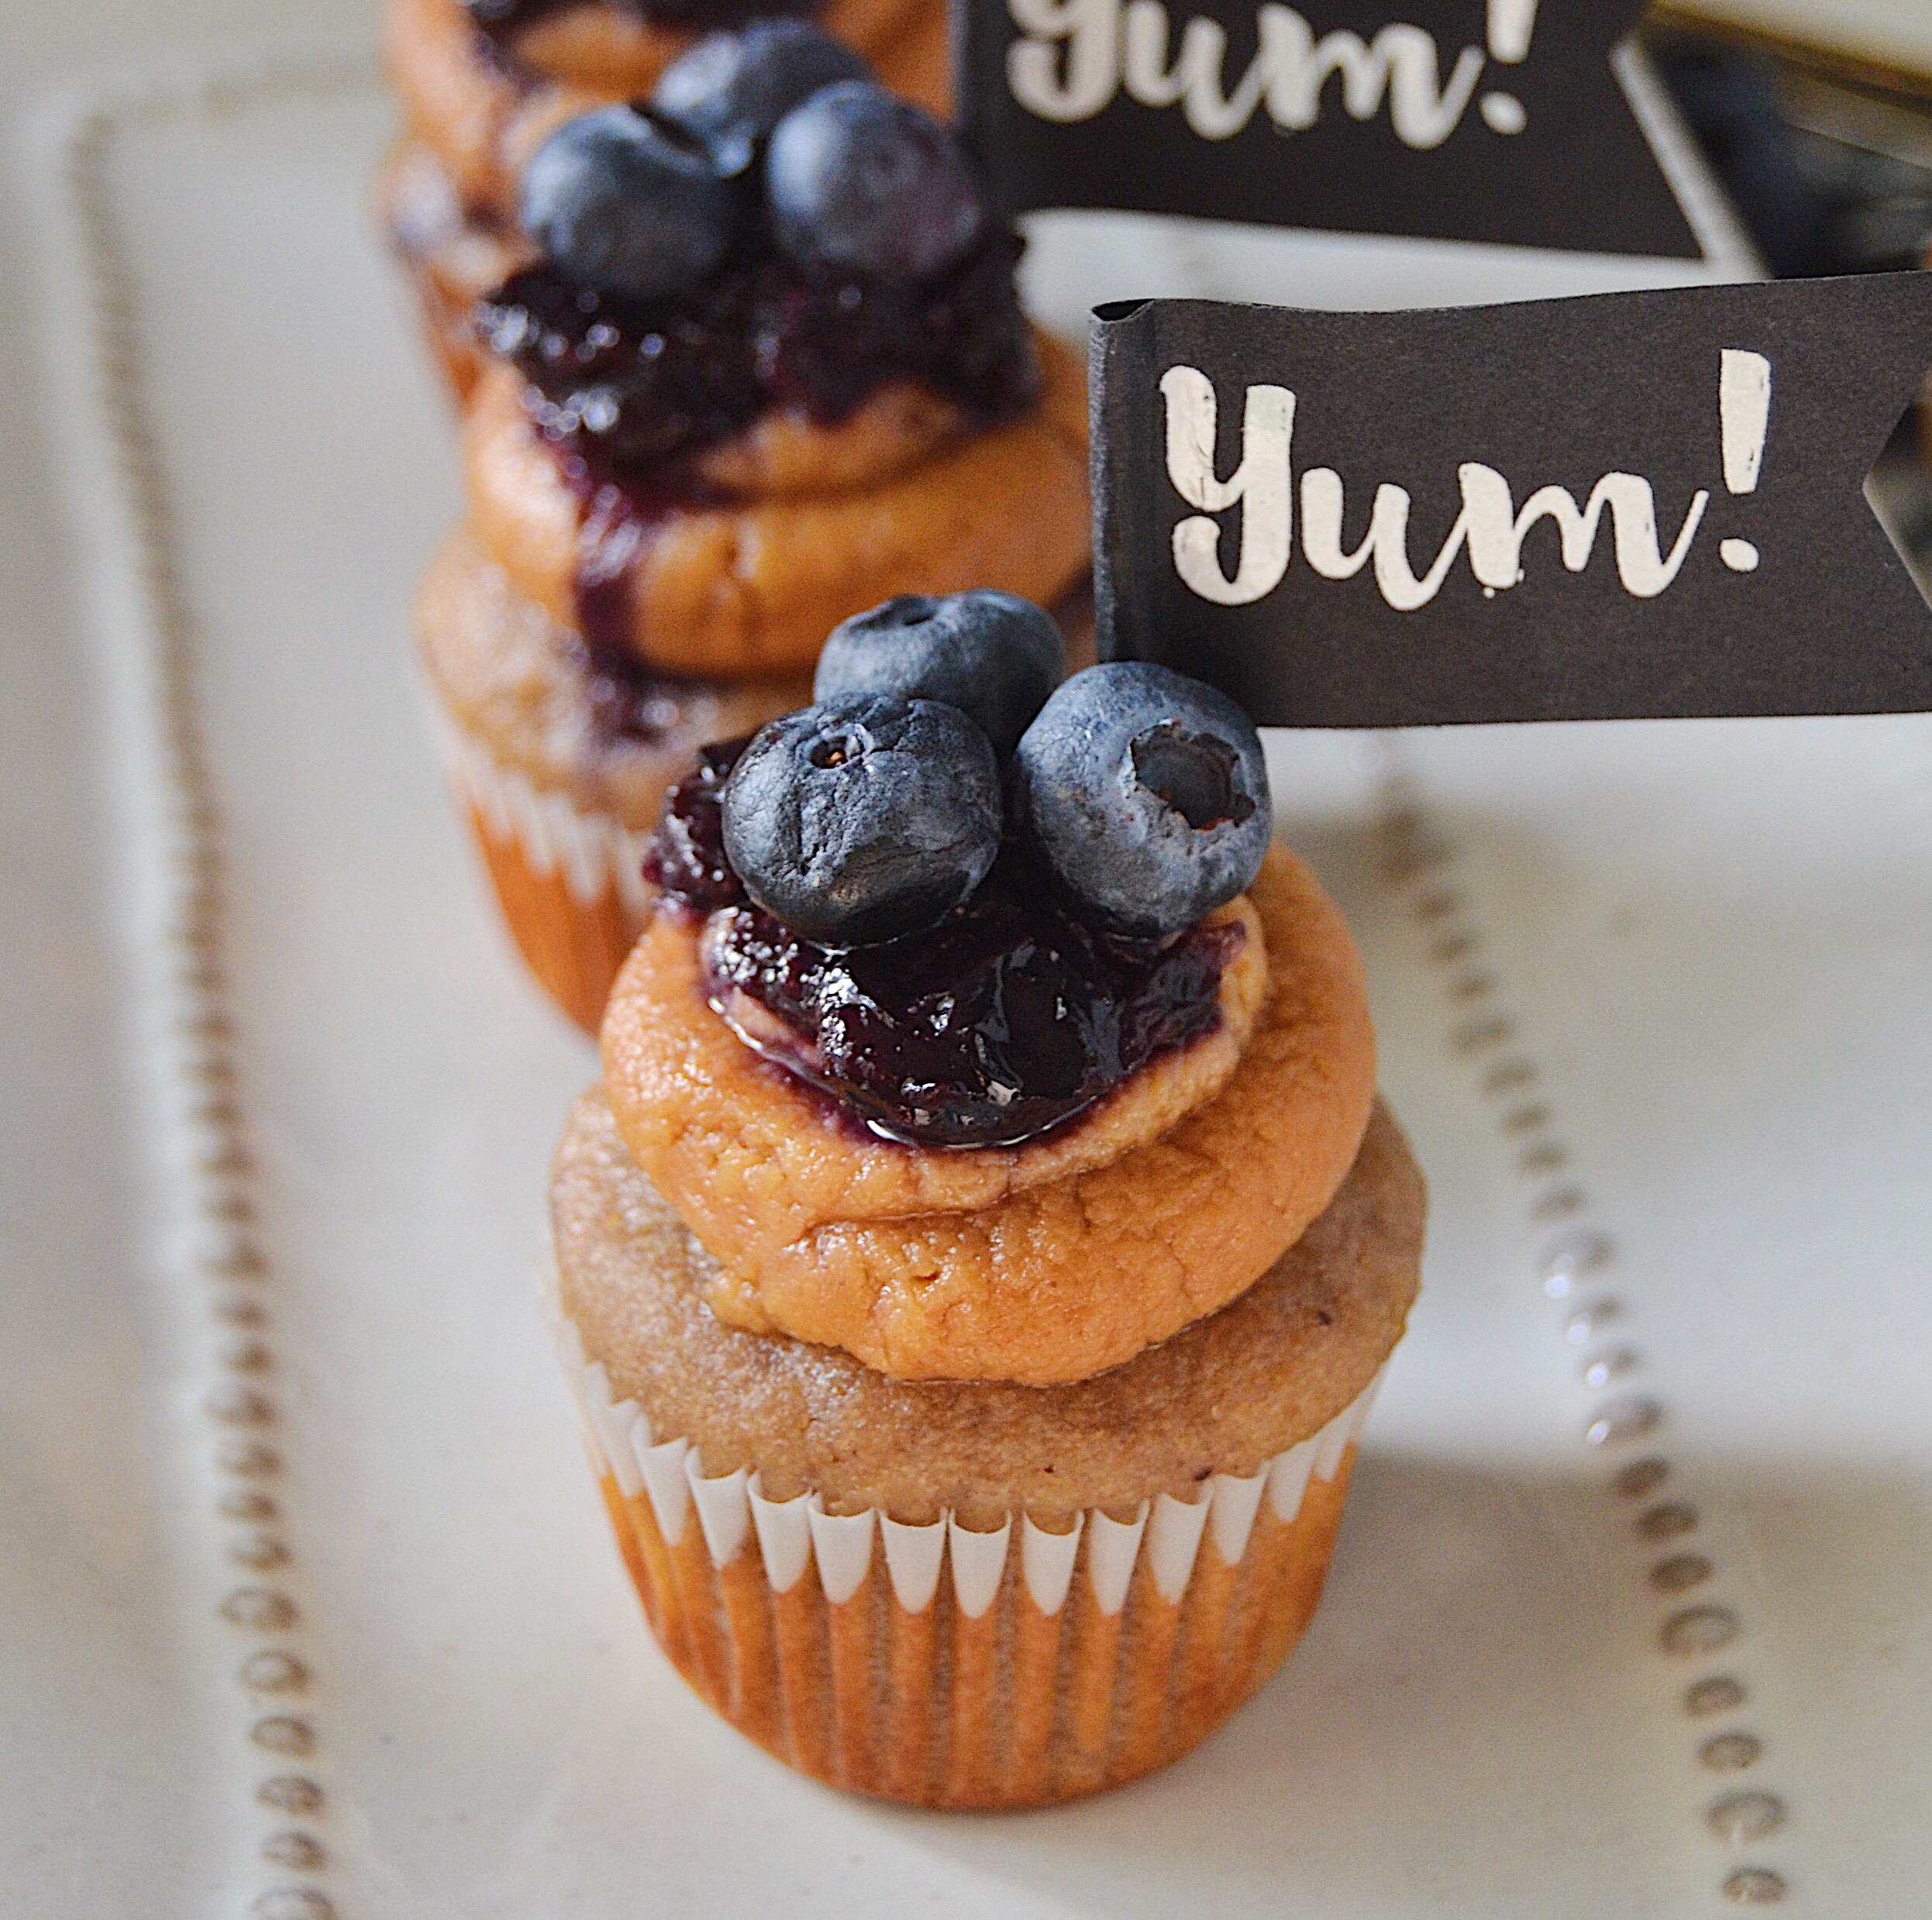 Peanut Butter and Blueberry Jam Pupcakes for the dog you love to spoil